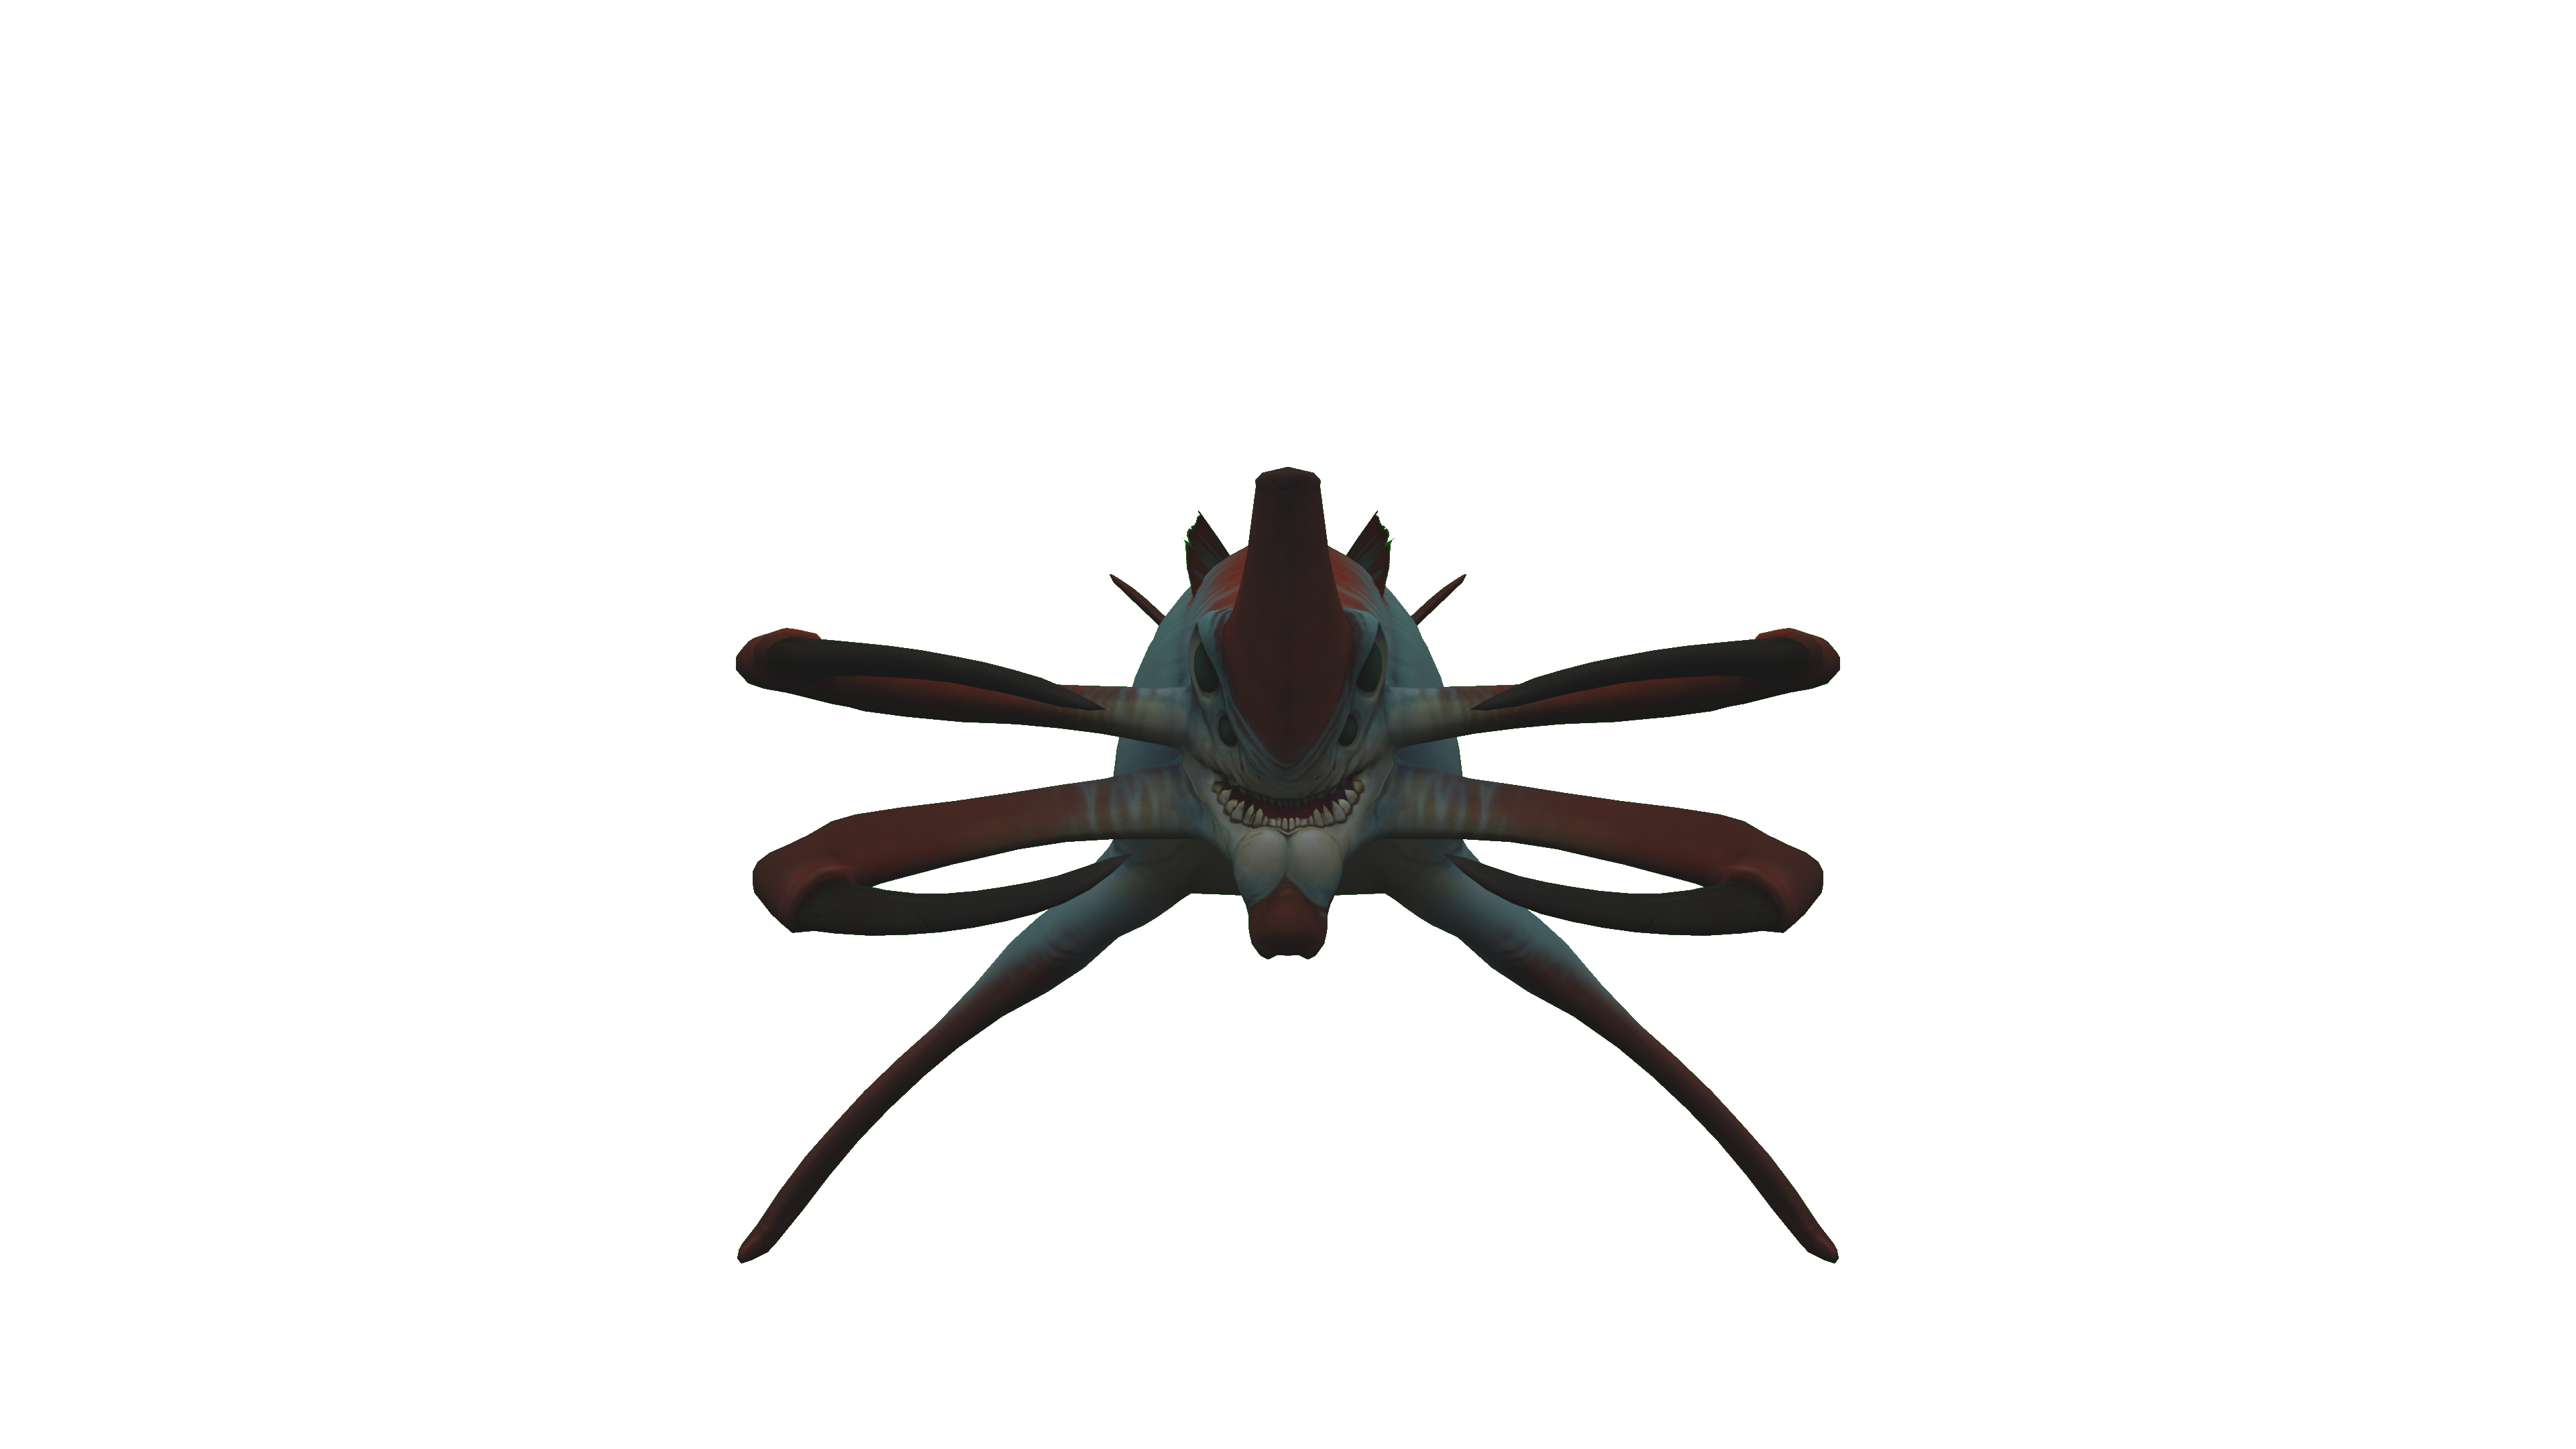 subnautica reaper leviathan cut out